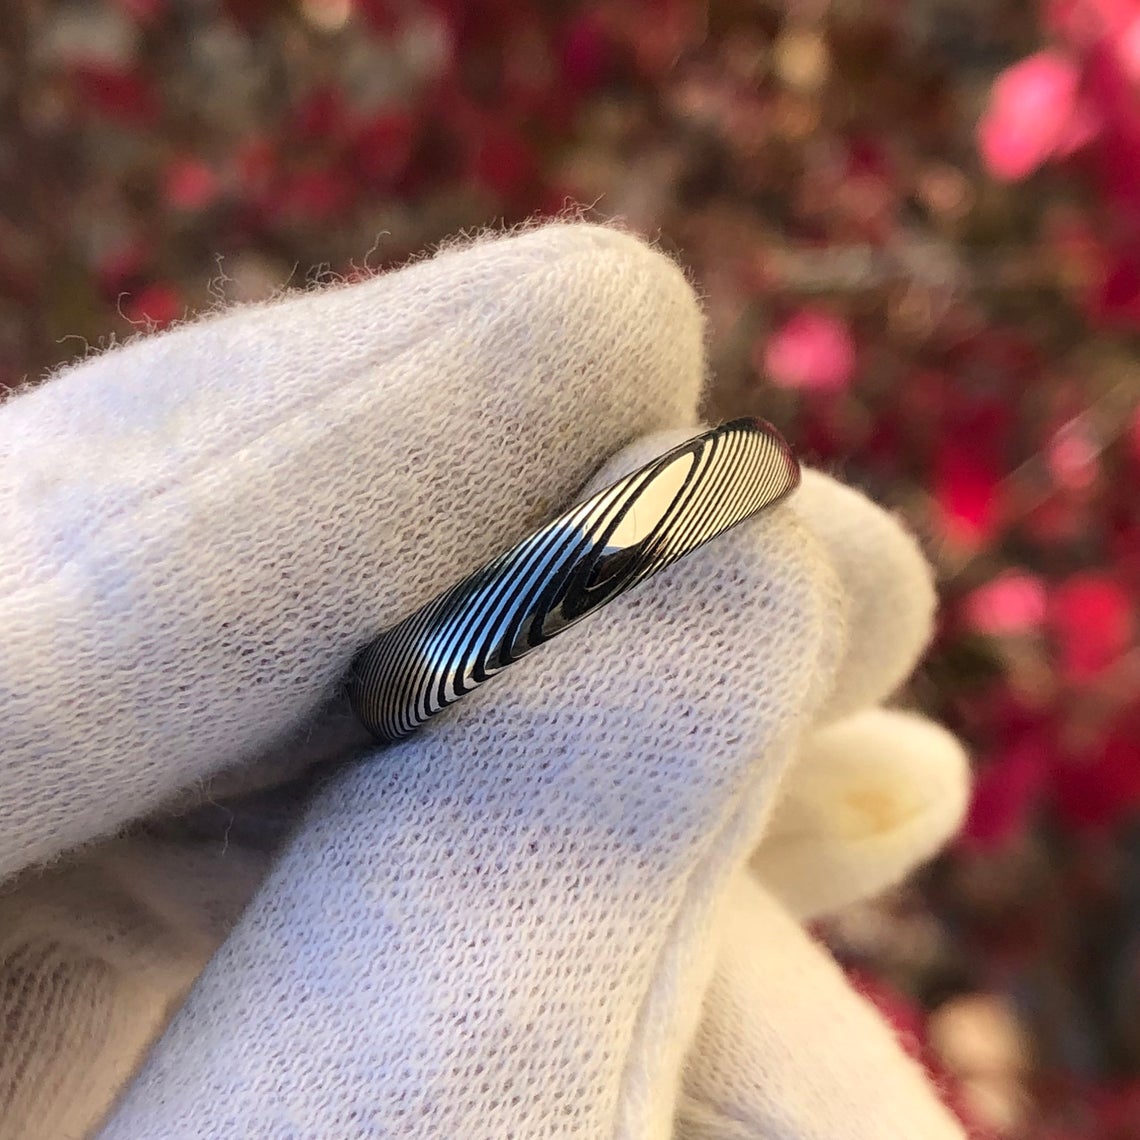 4mm wide Damascus steel wedding band with a rounded profile